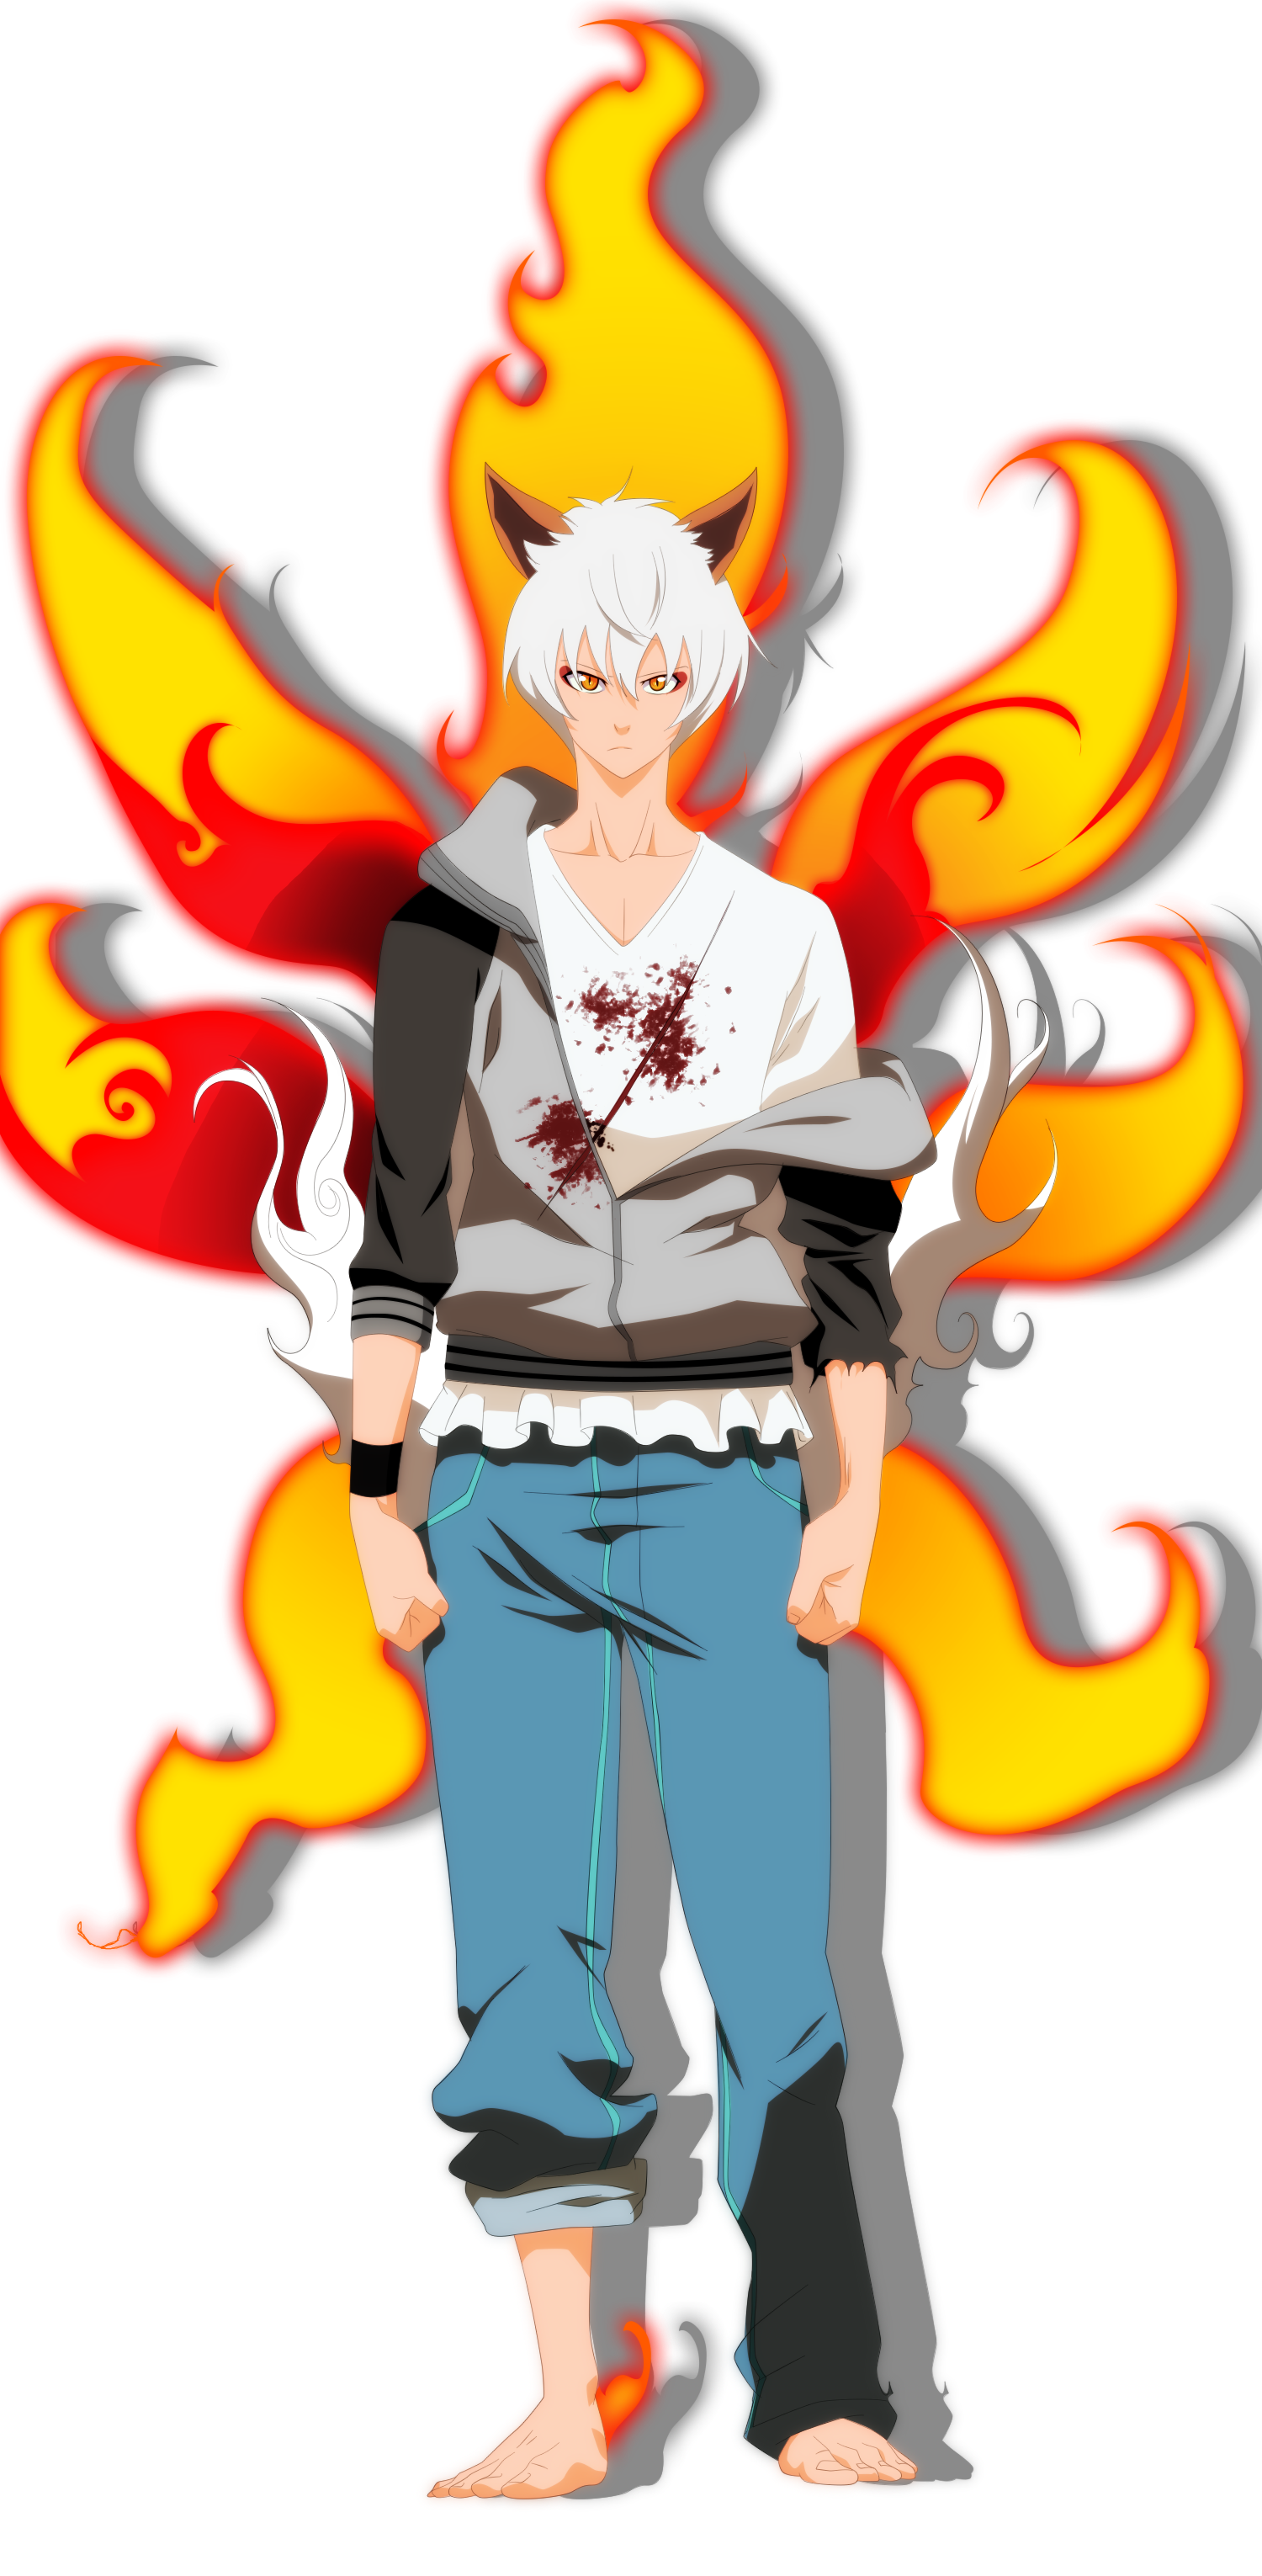 The God of High School - The Ninetails Guardian by Advance996 on